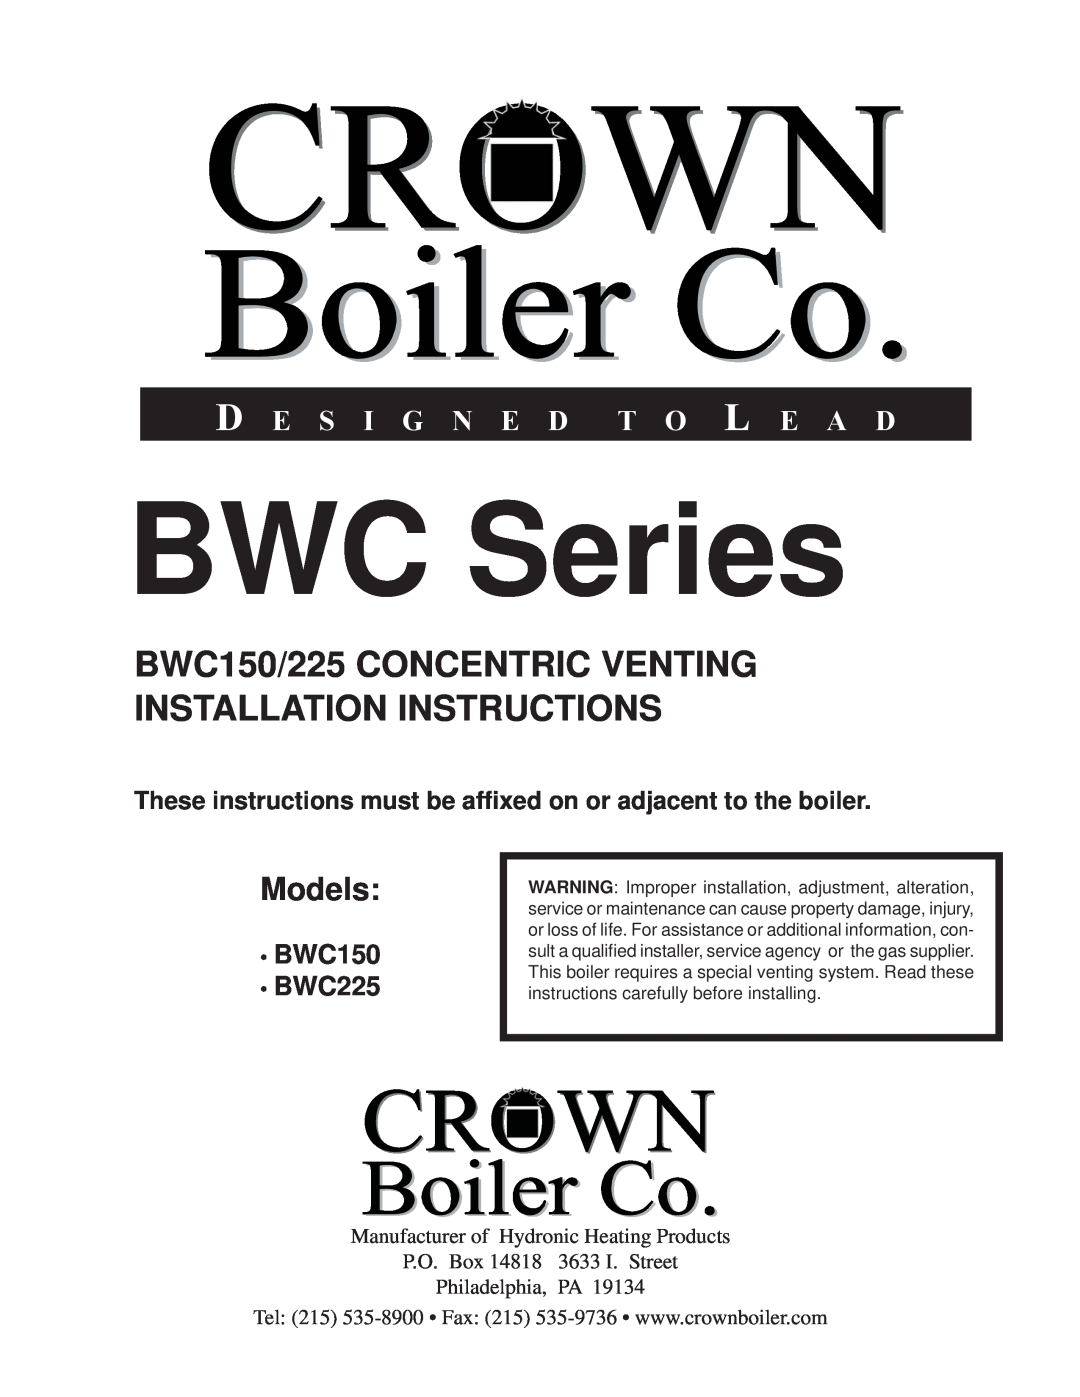 Crown Boiler M600 installation instructions Manufacturer of Hydronic Heating Products, BWC Series, Models, BWC150 BWC225 